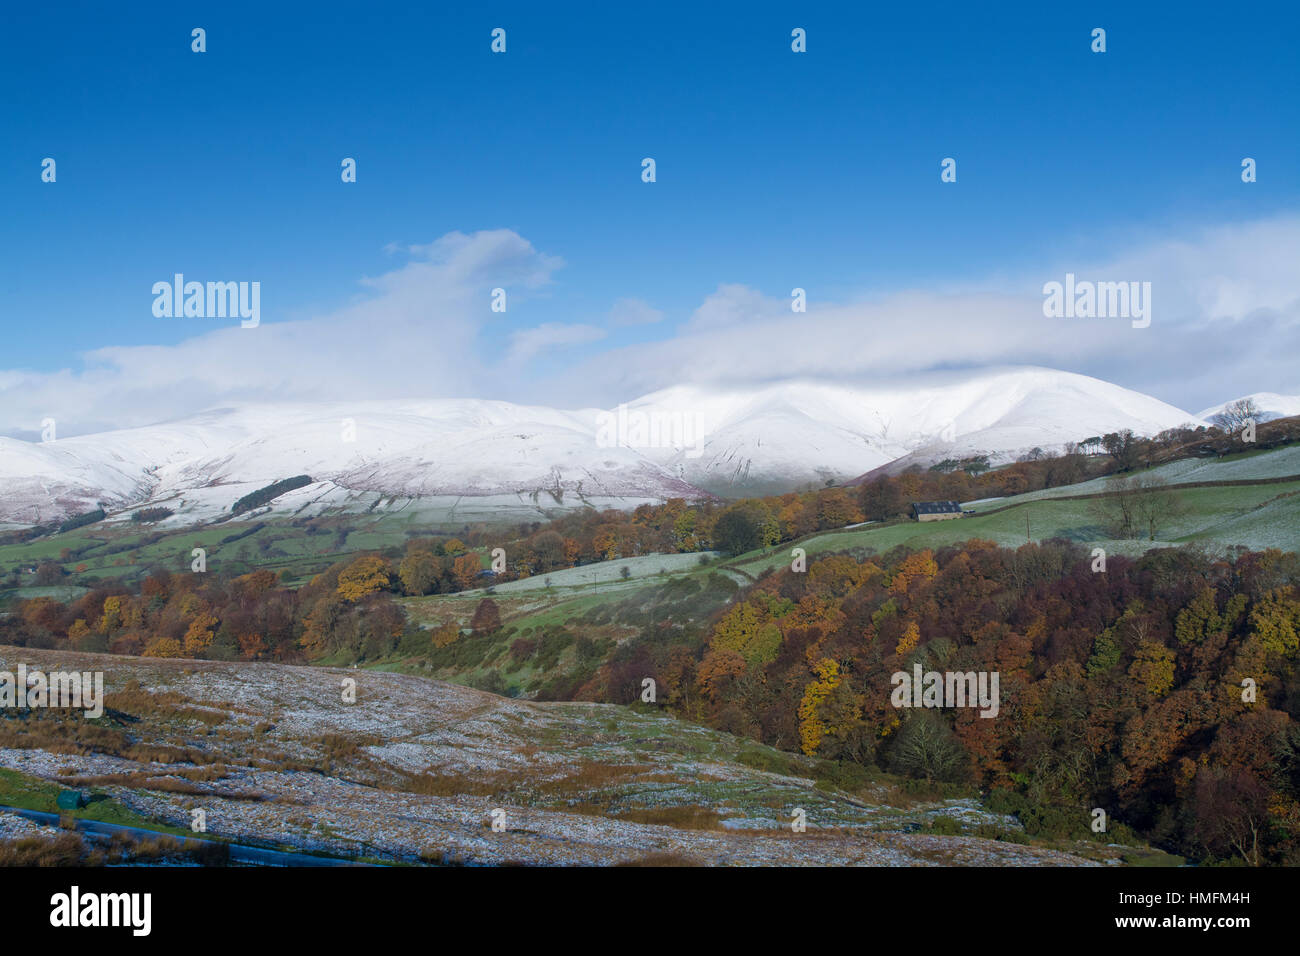 Eastern Howgill Fells near Sedbergh covered in early winter snow, seen from Garsdale, where the trees are still in autumn foilage. Cumbria, UK. Stock Photo